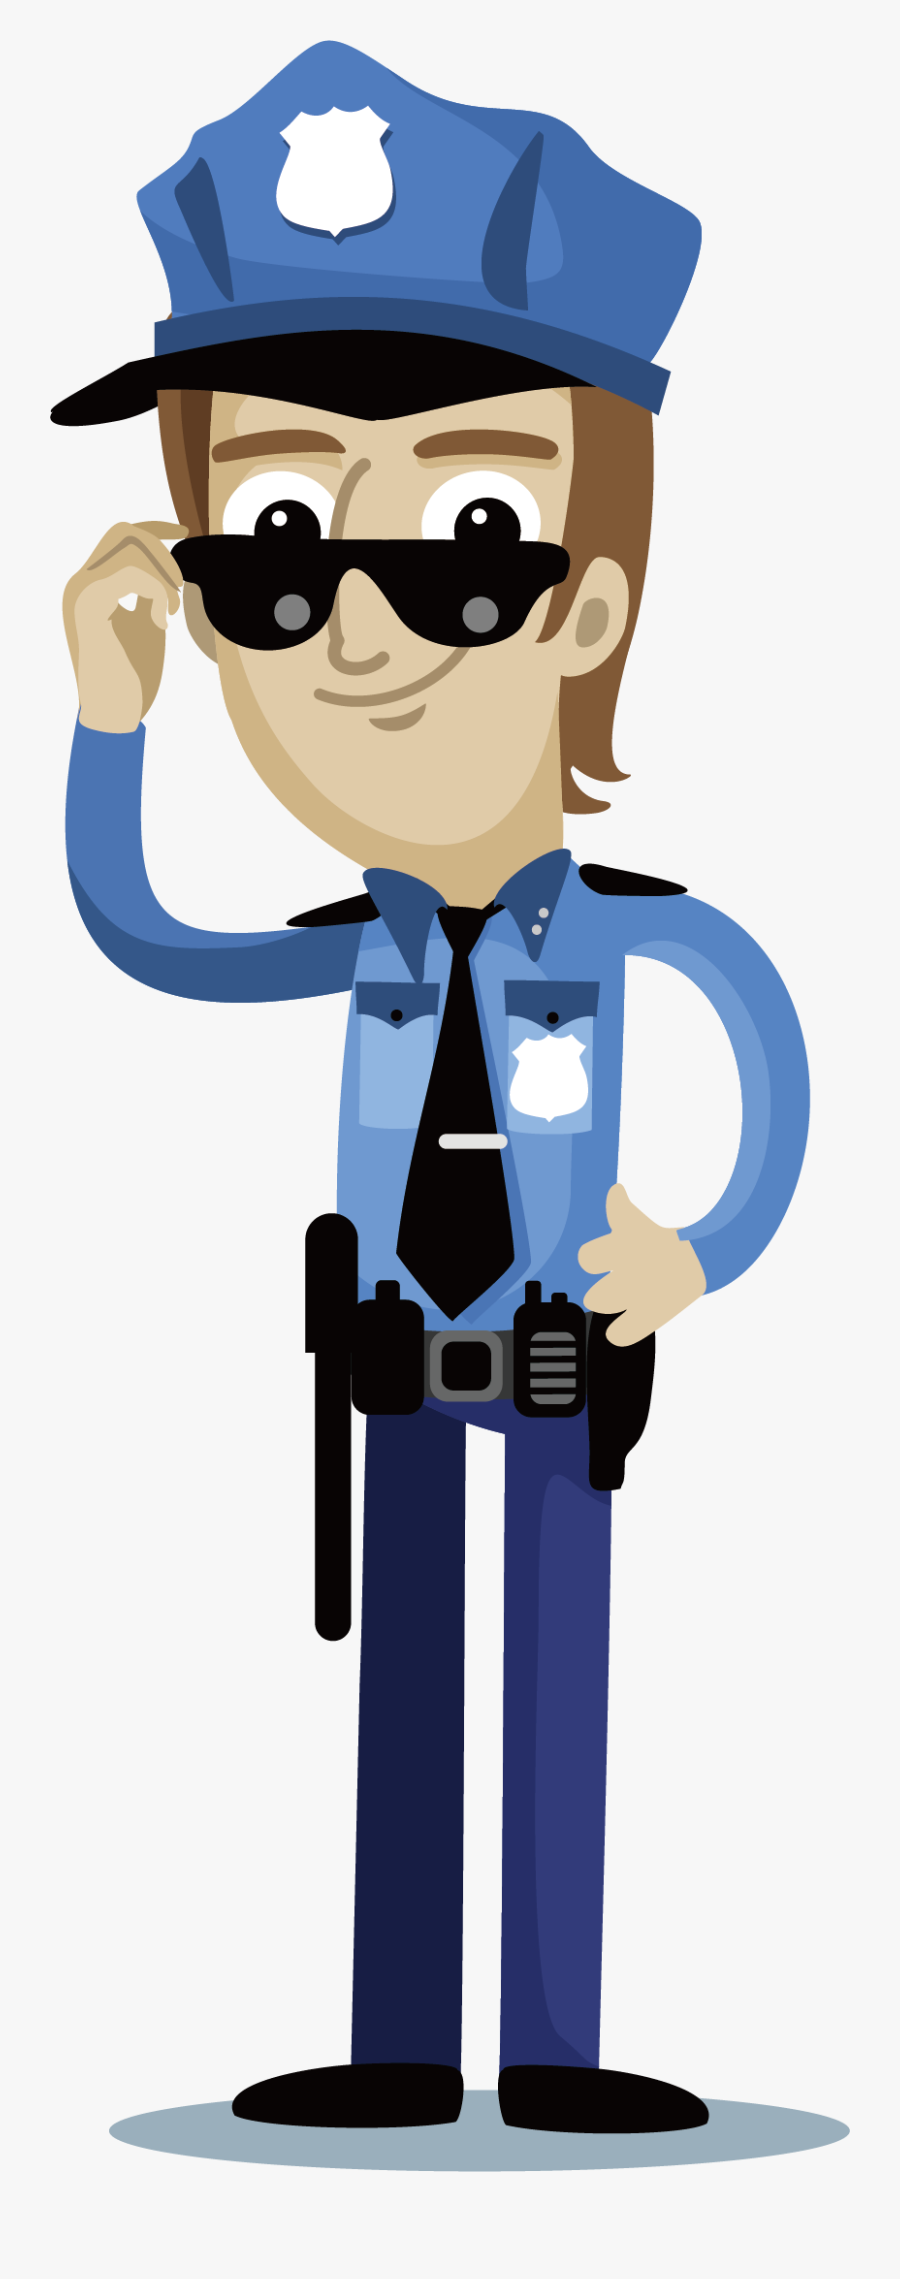 Wearing Sunglasses Of Officer Police The Cartoon Clipart - Police Cartoon Png, Transparent Clipart